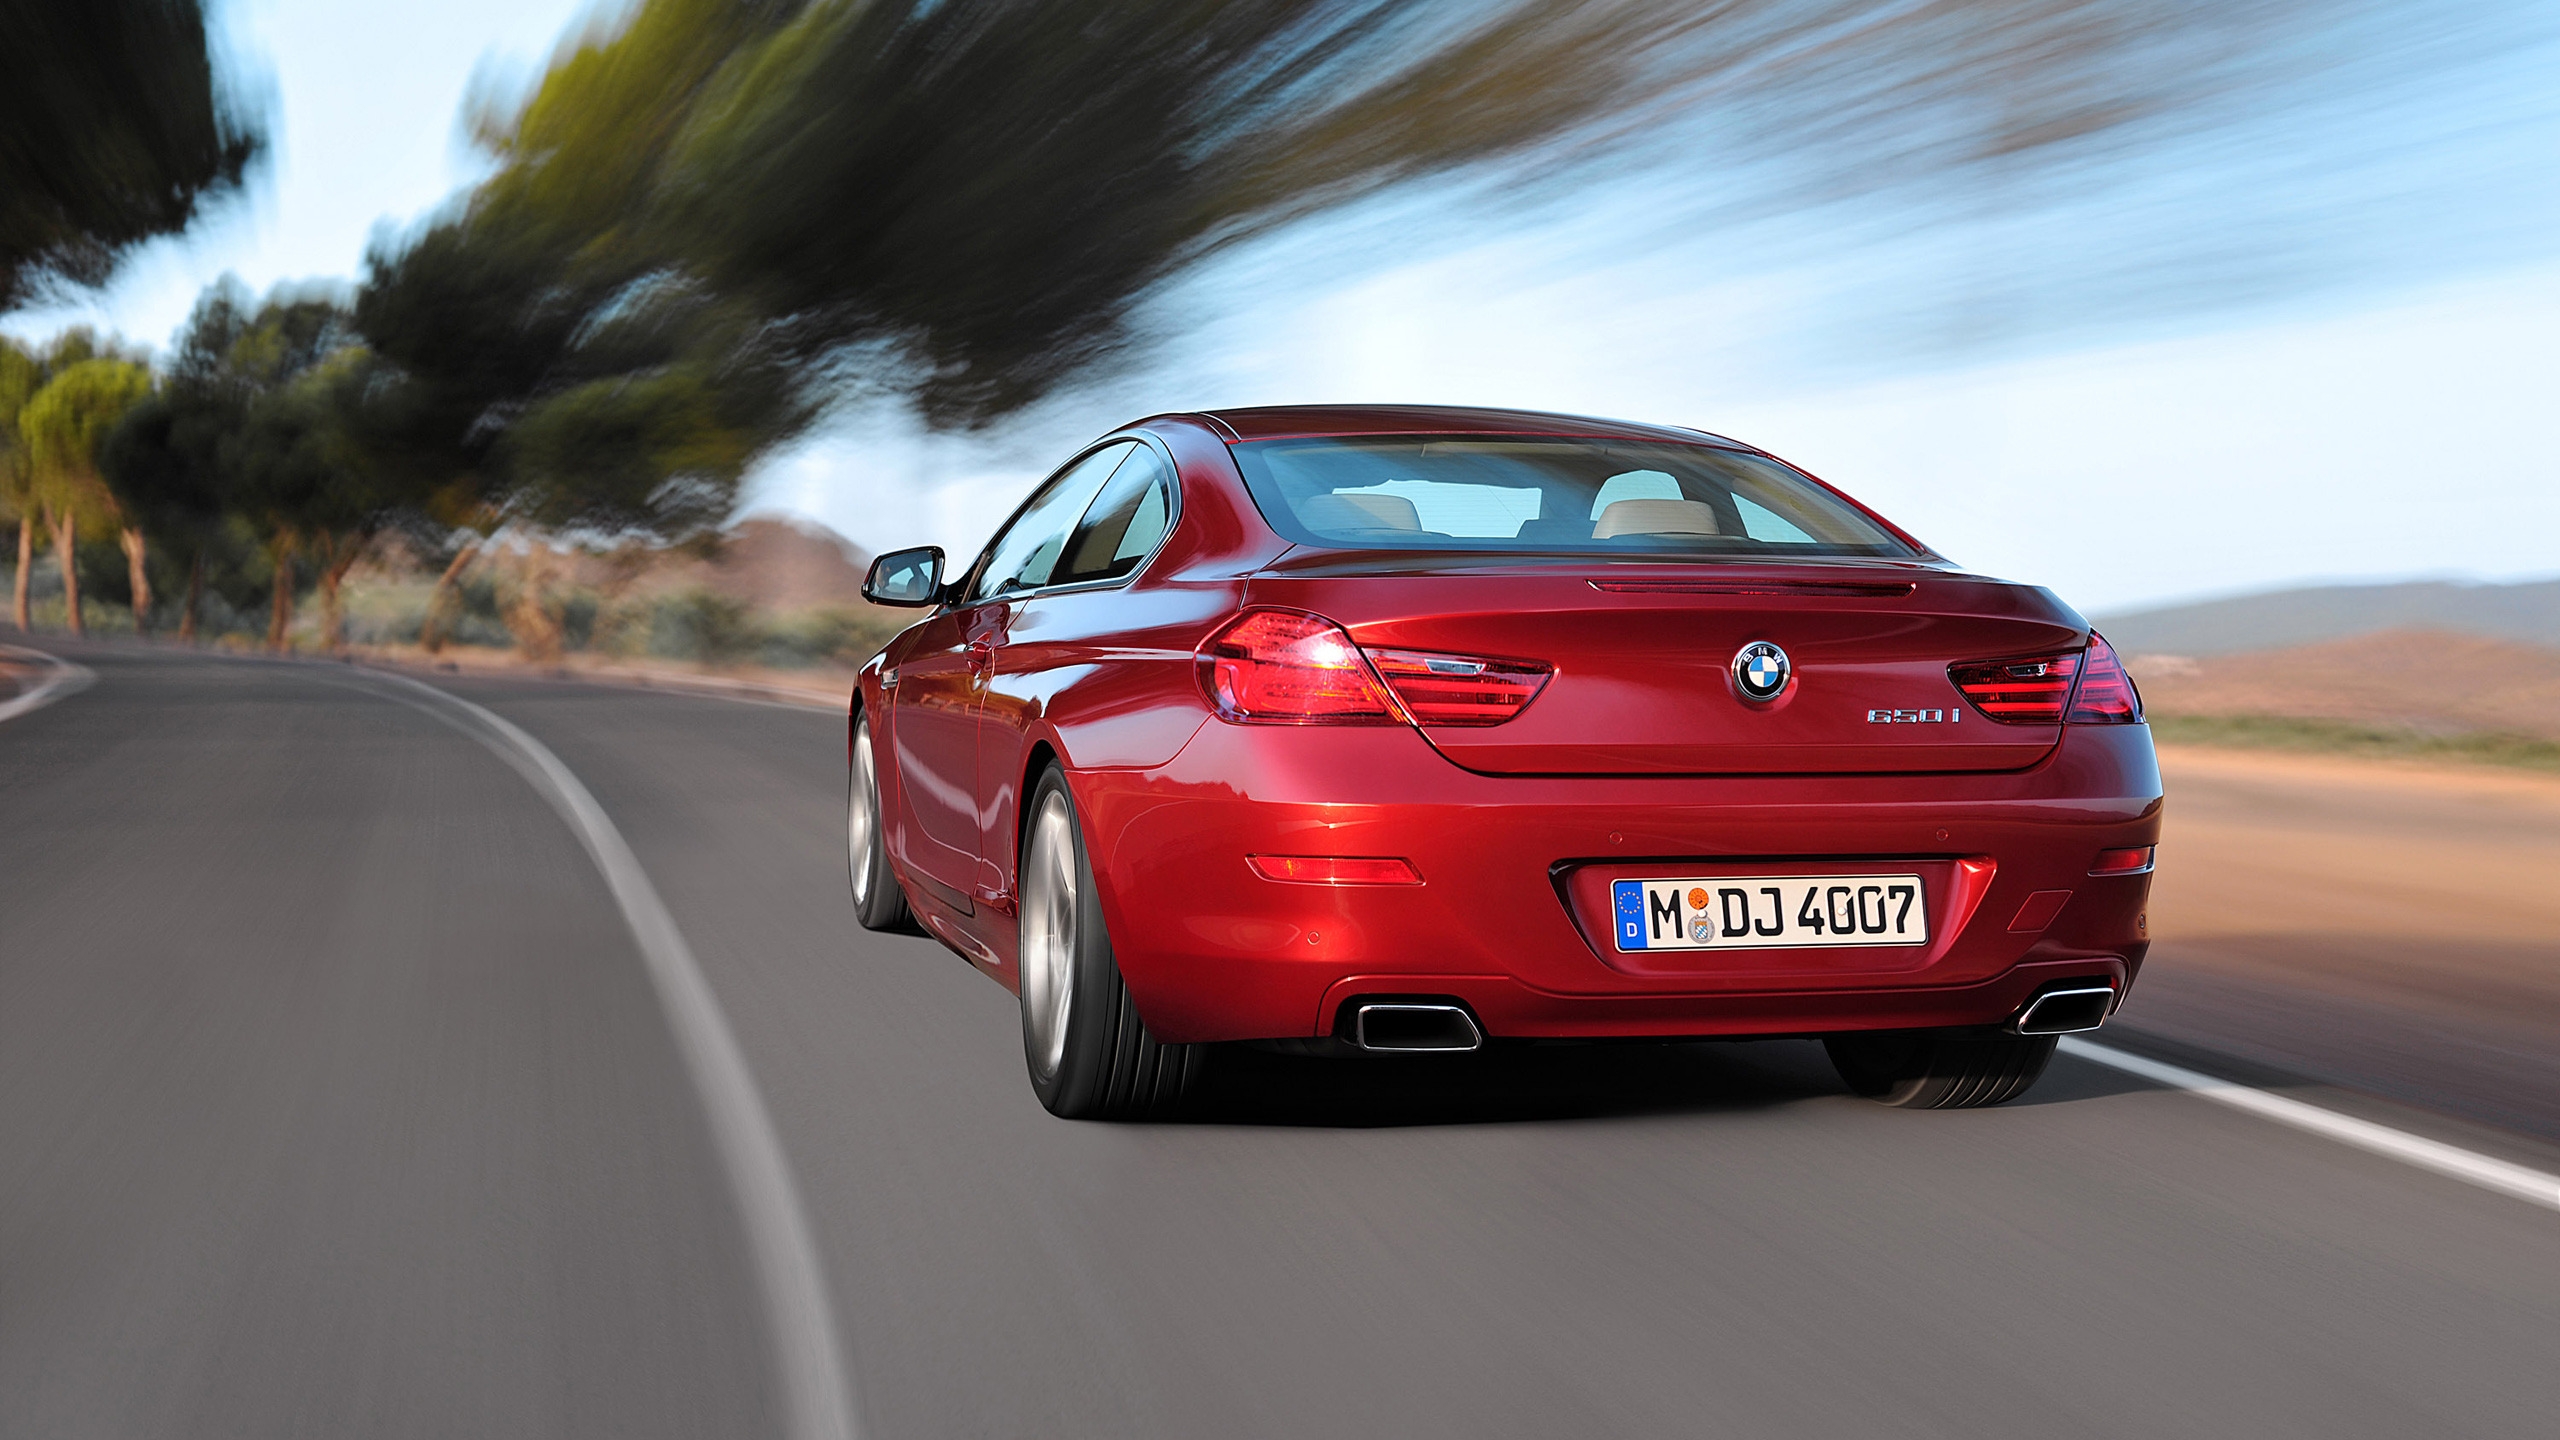 BMW 650i Coupe Rear for 2560x1440 HDTV resolution